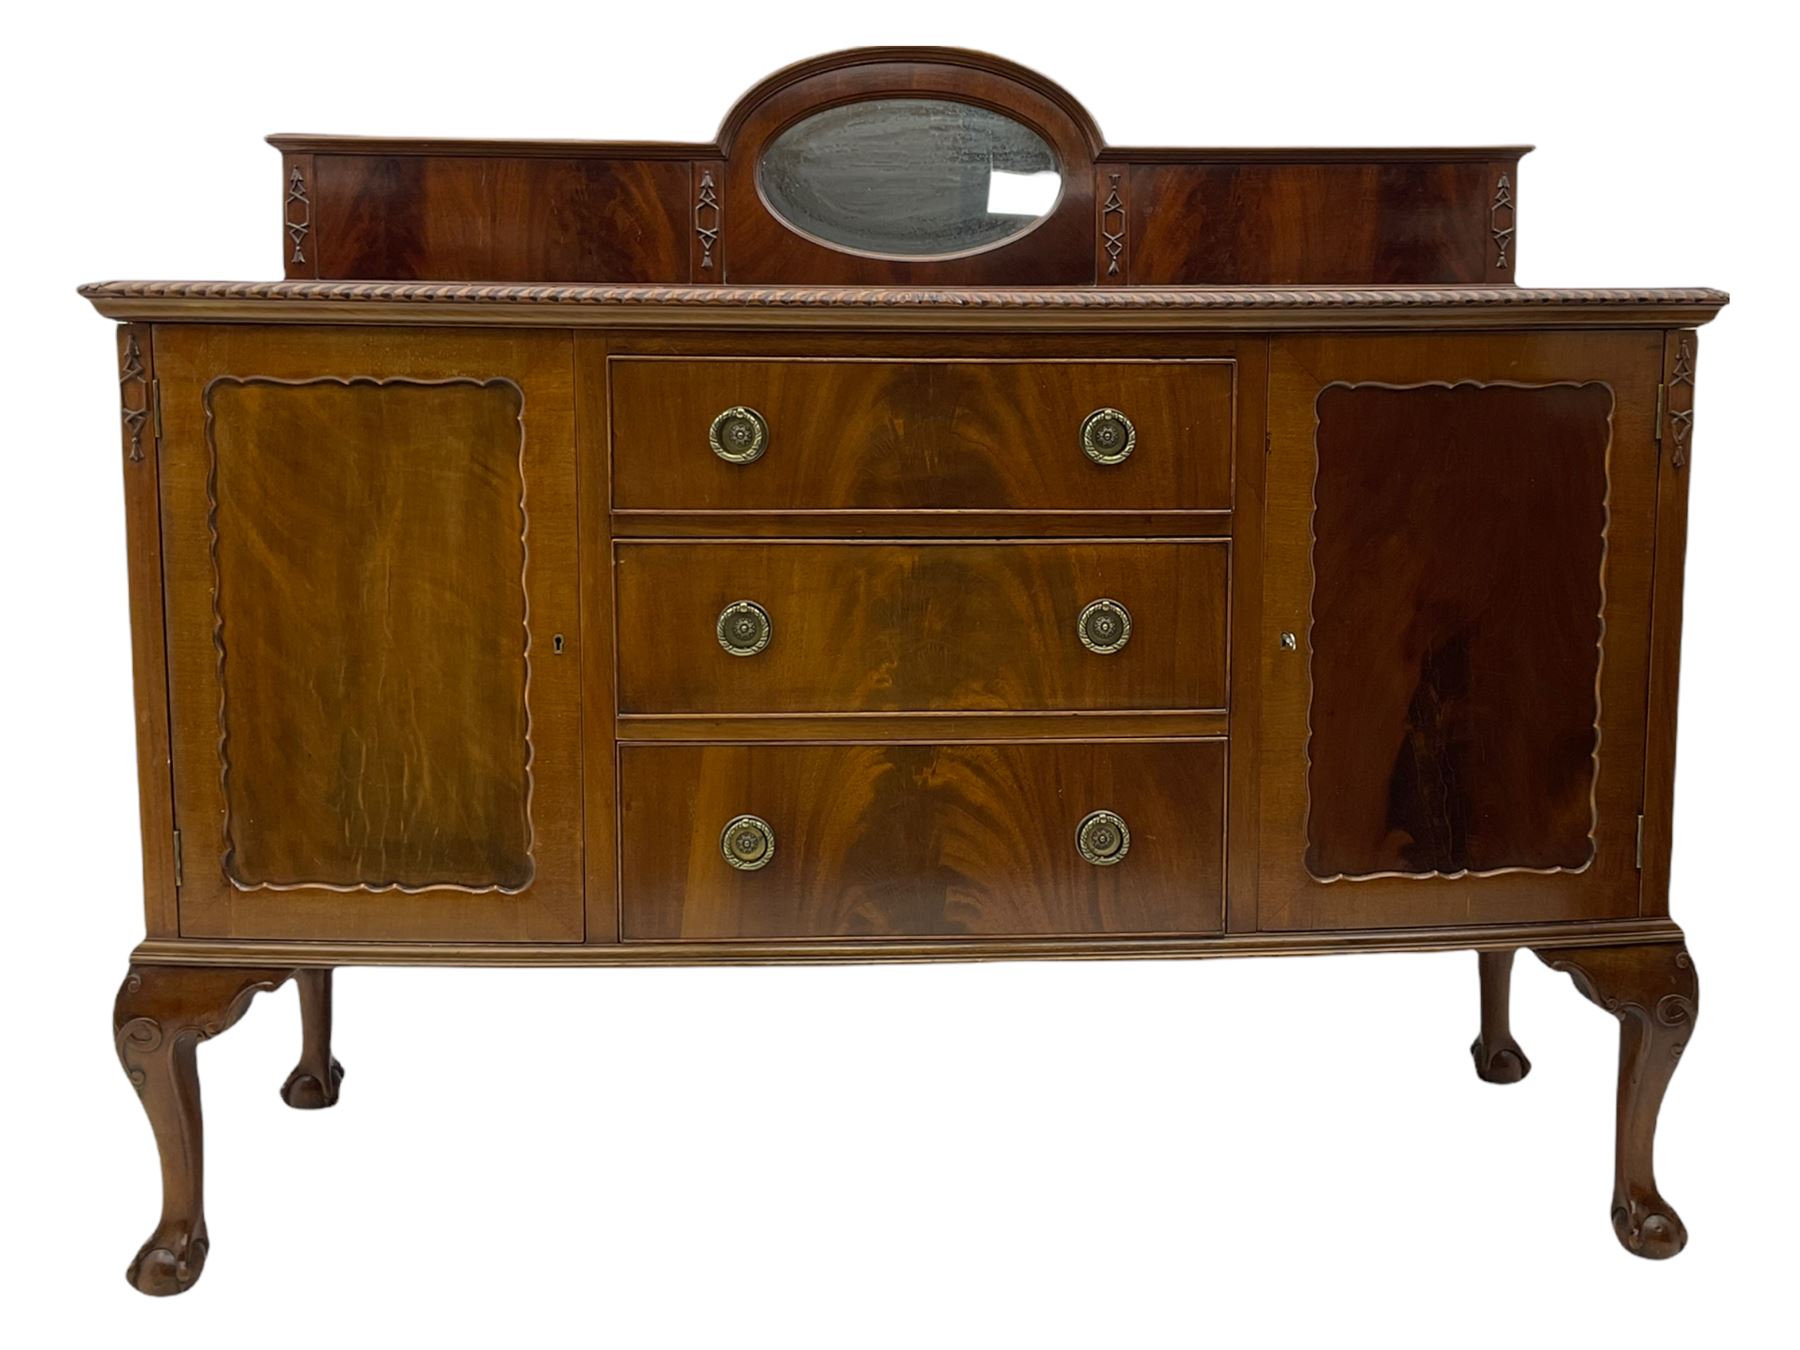 Early 20th century mahogany bow-fronted sideboard